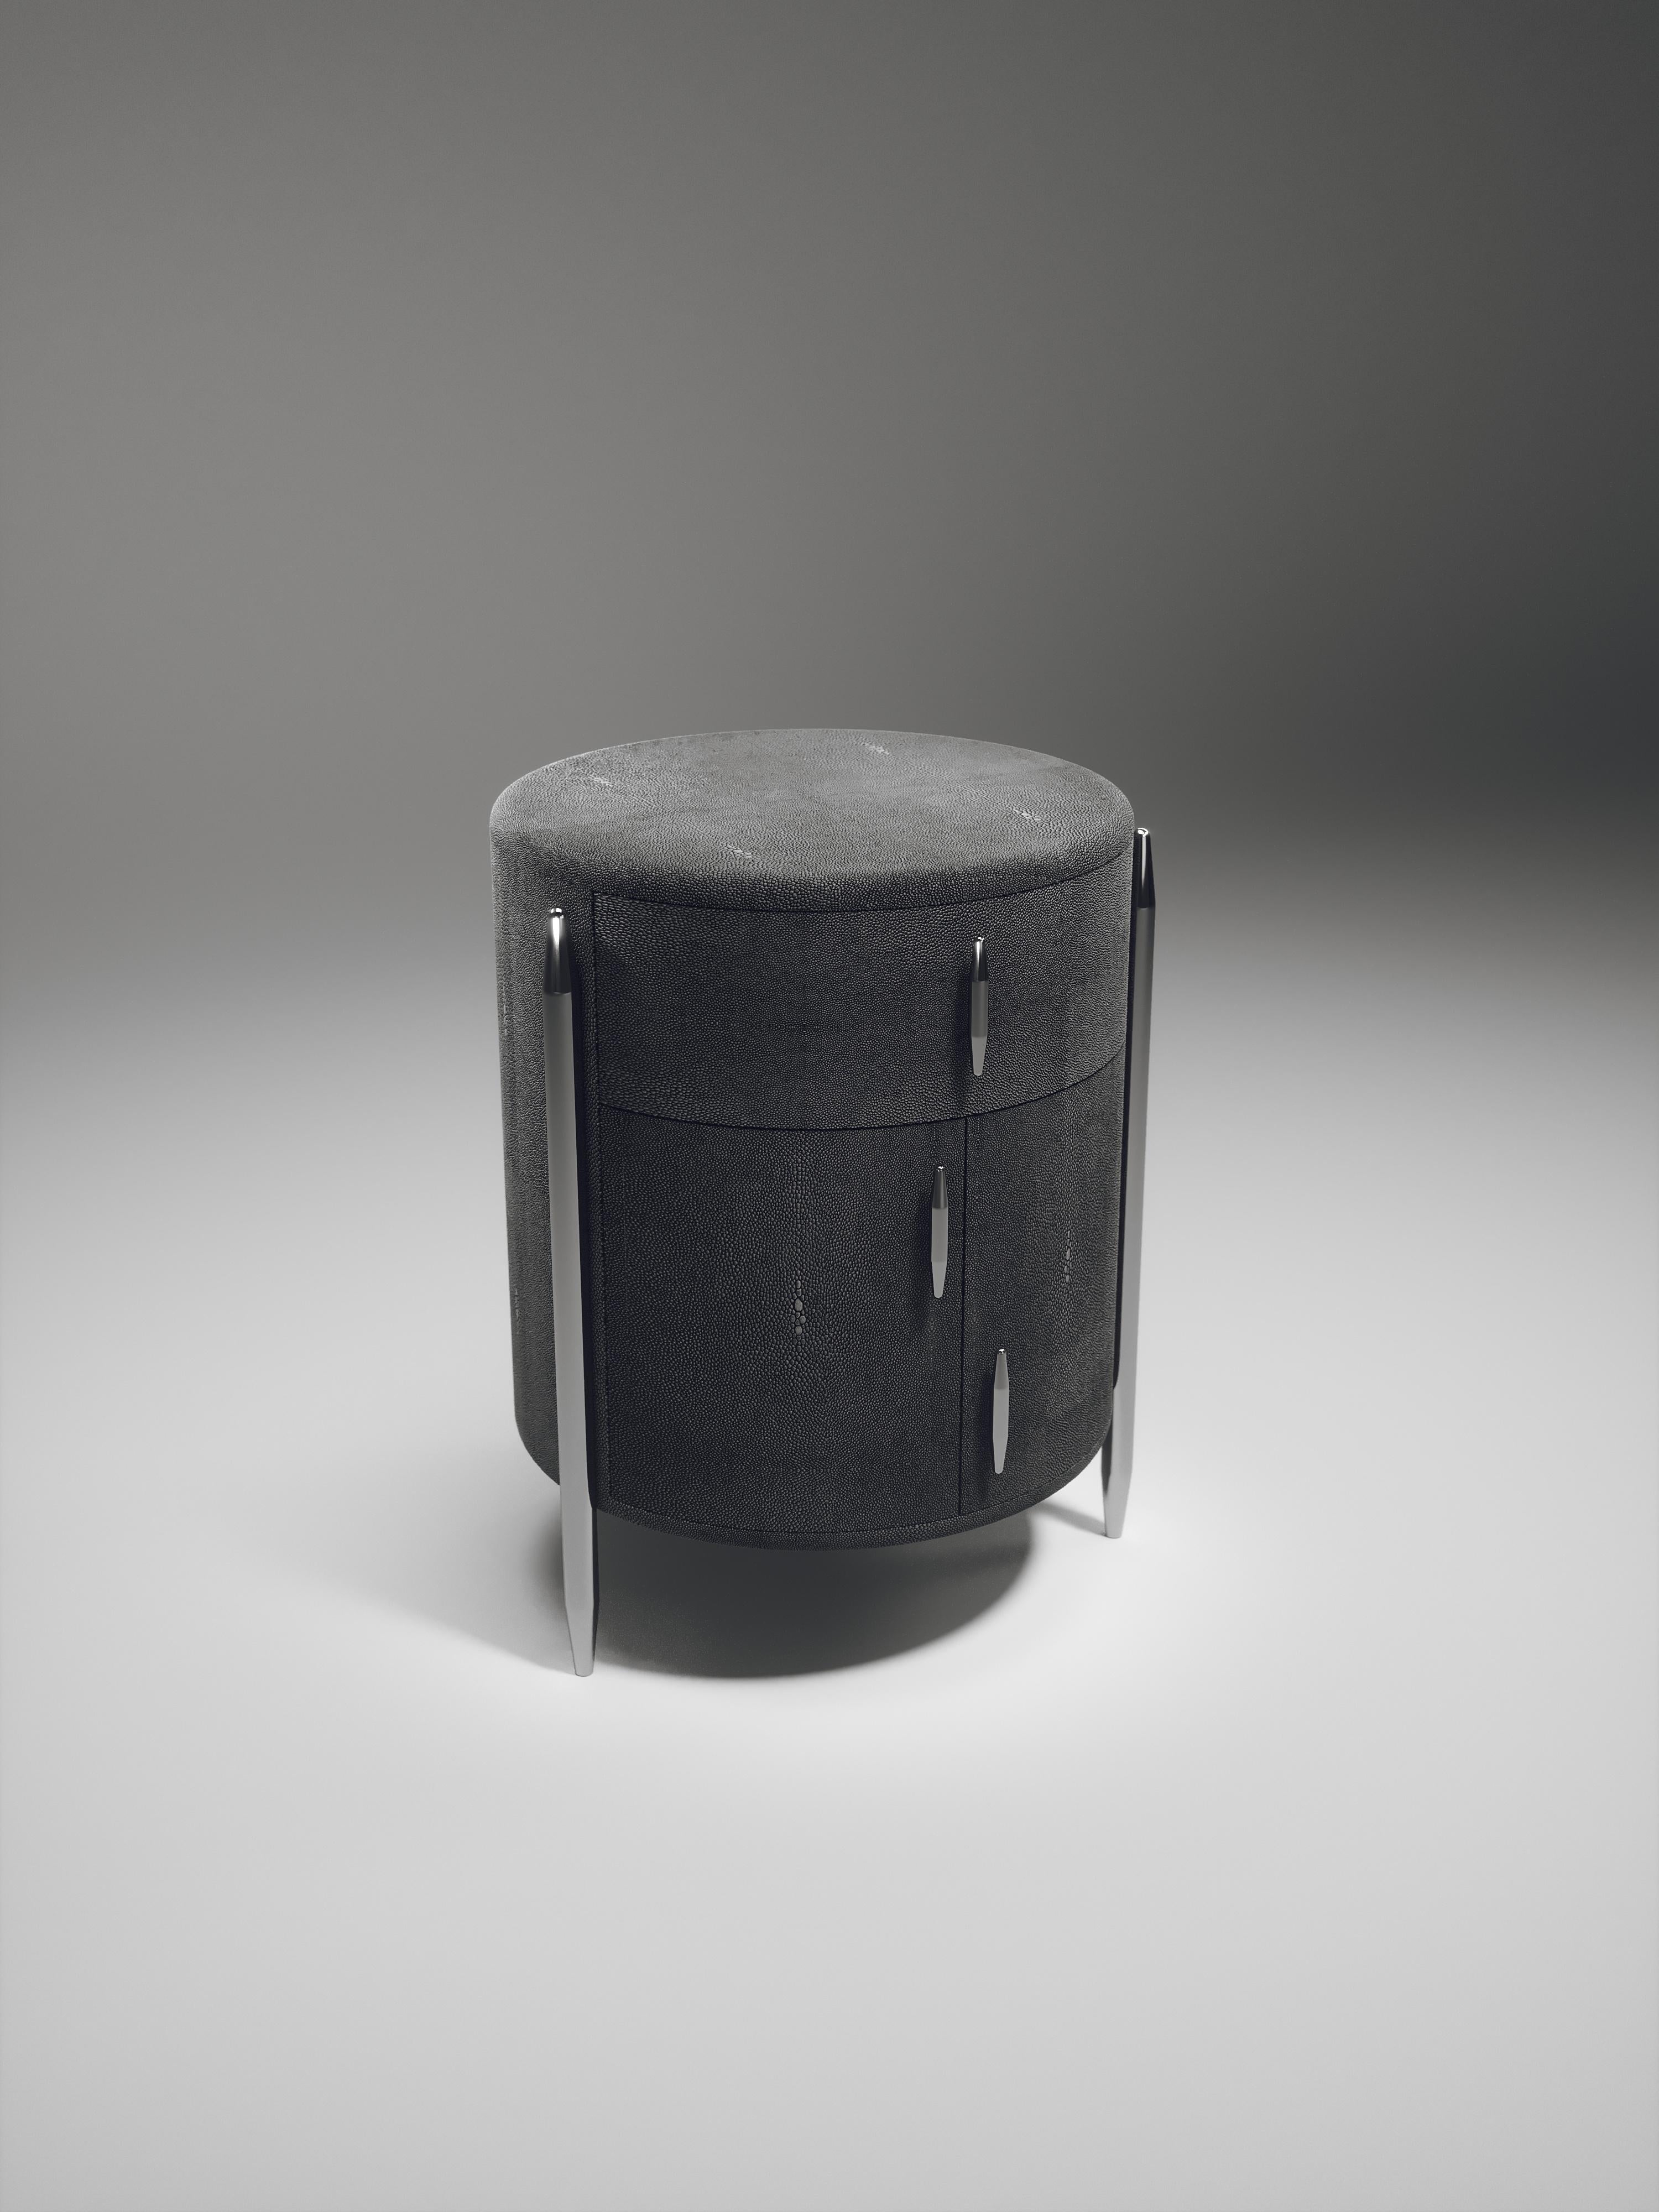 The Dandy round bedside table by Kifu Paris is an elegant and a luxurious home accent, inlaid in black shagreen with polished stainless steel details. This piece includes 1 drawer total and a cabinet below; the interiors are inlaid in gemelina wood